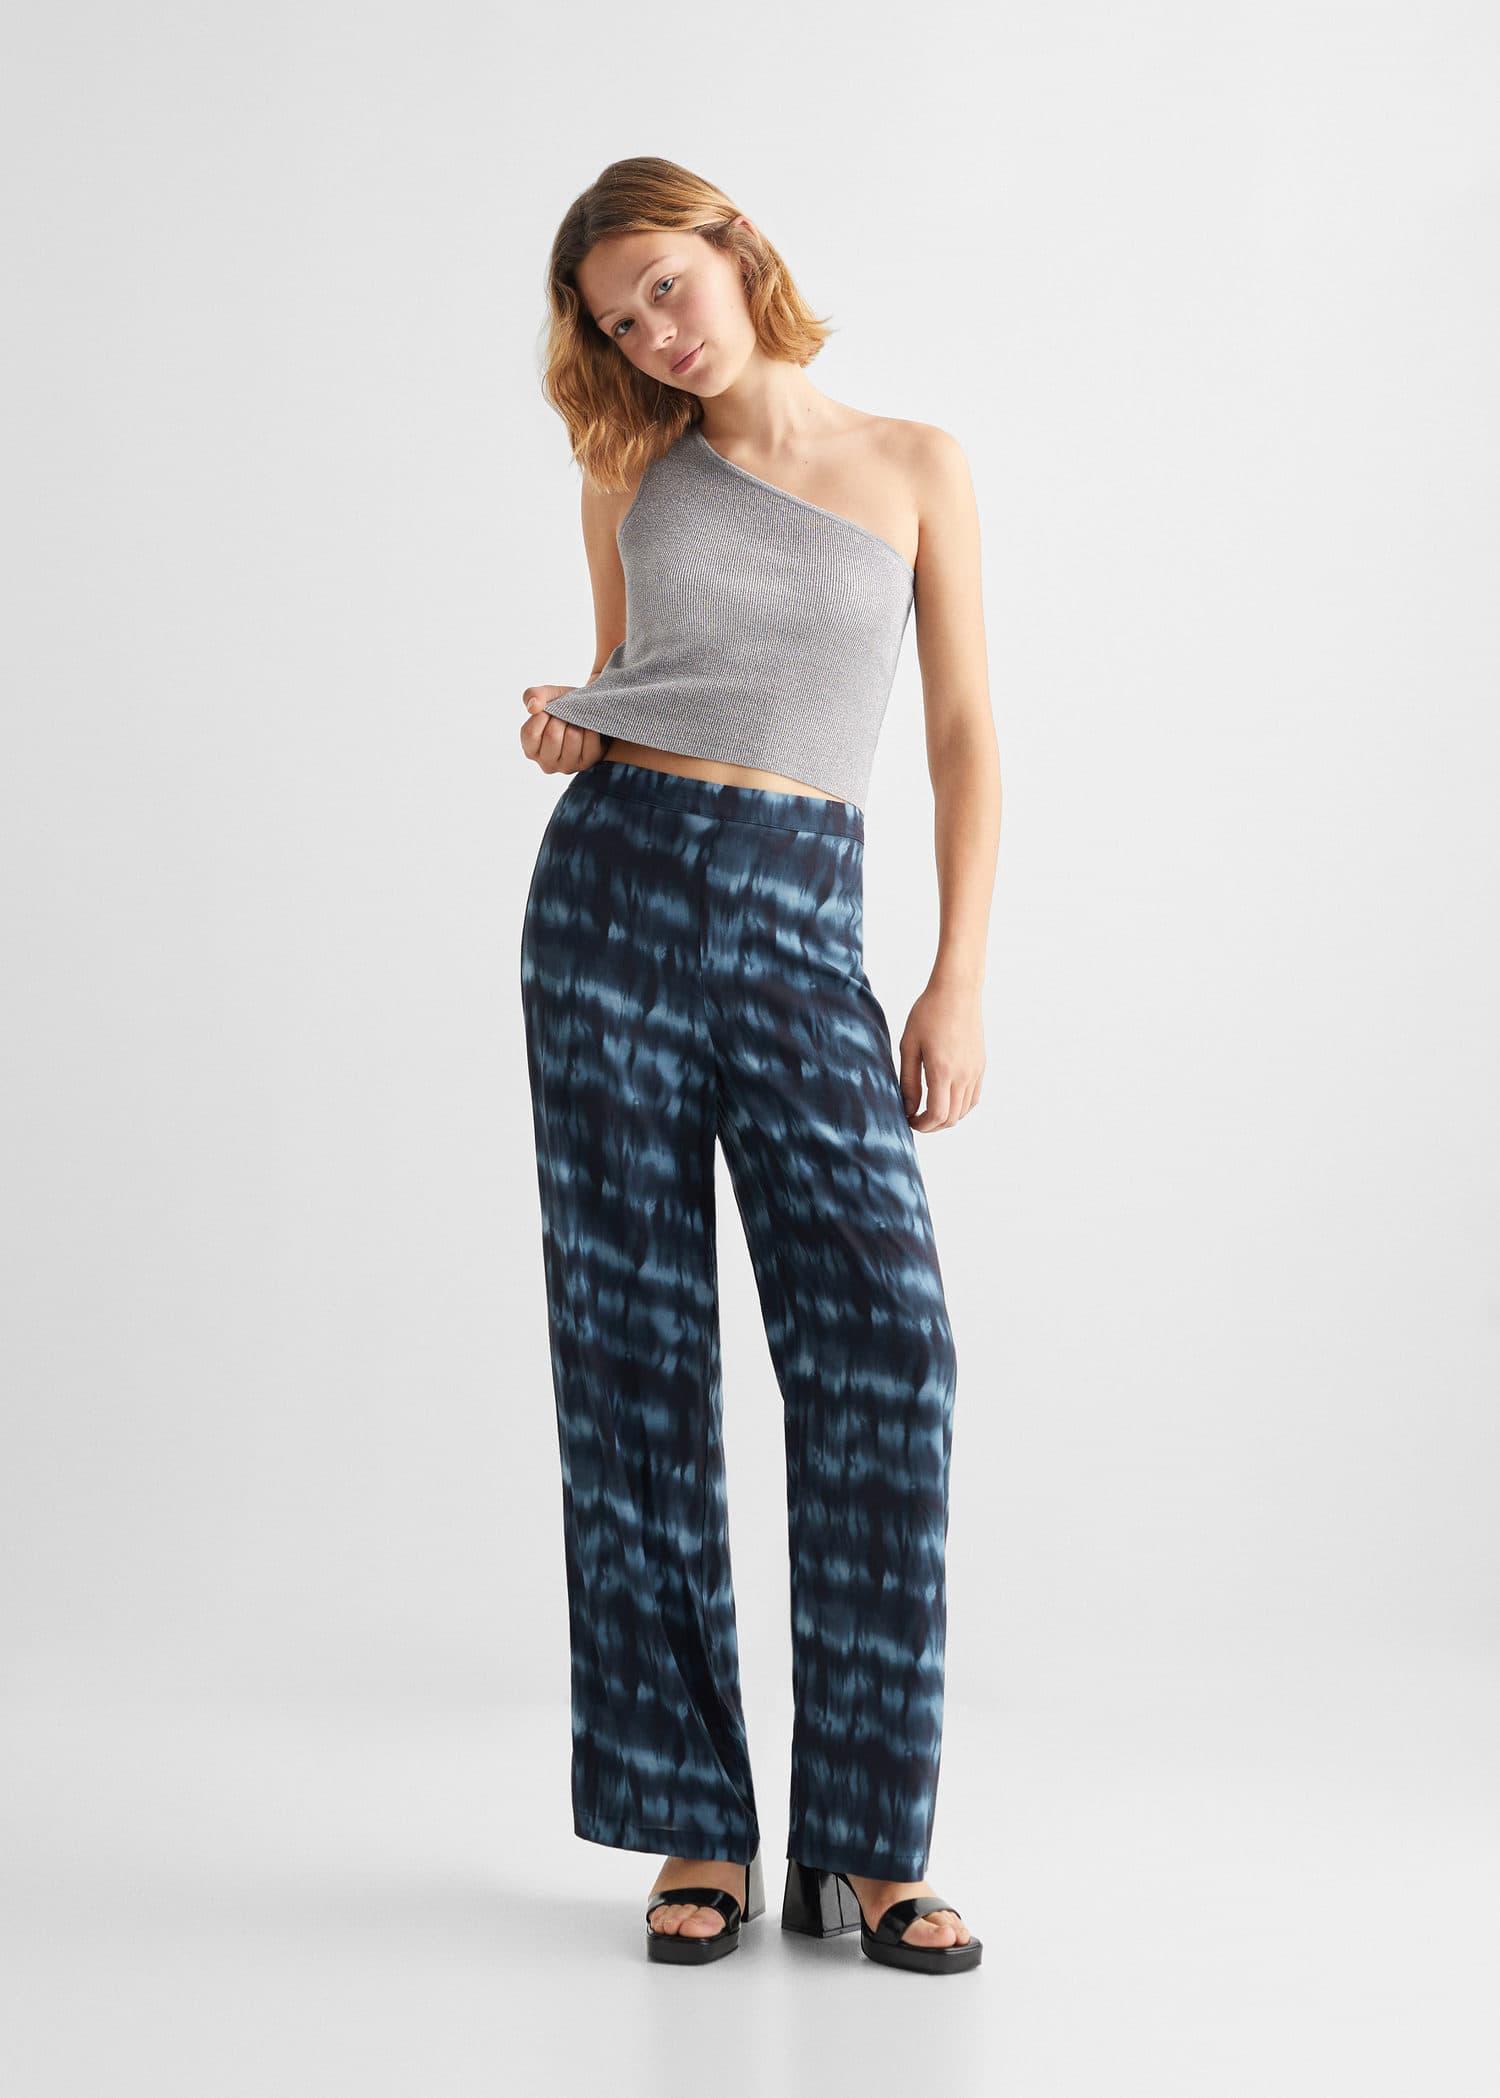 flowy printed trousers